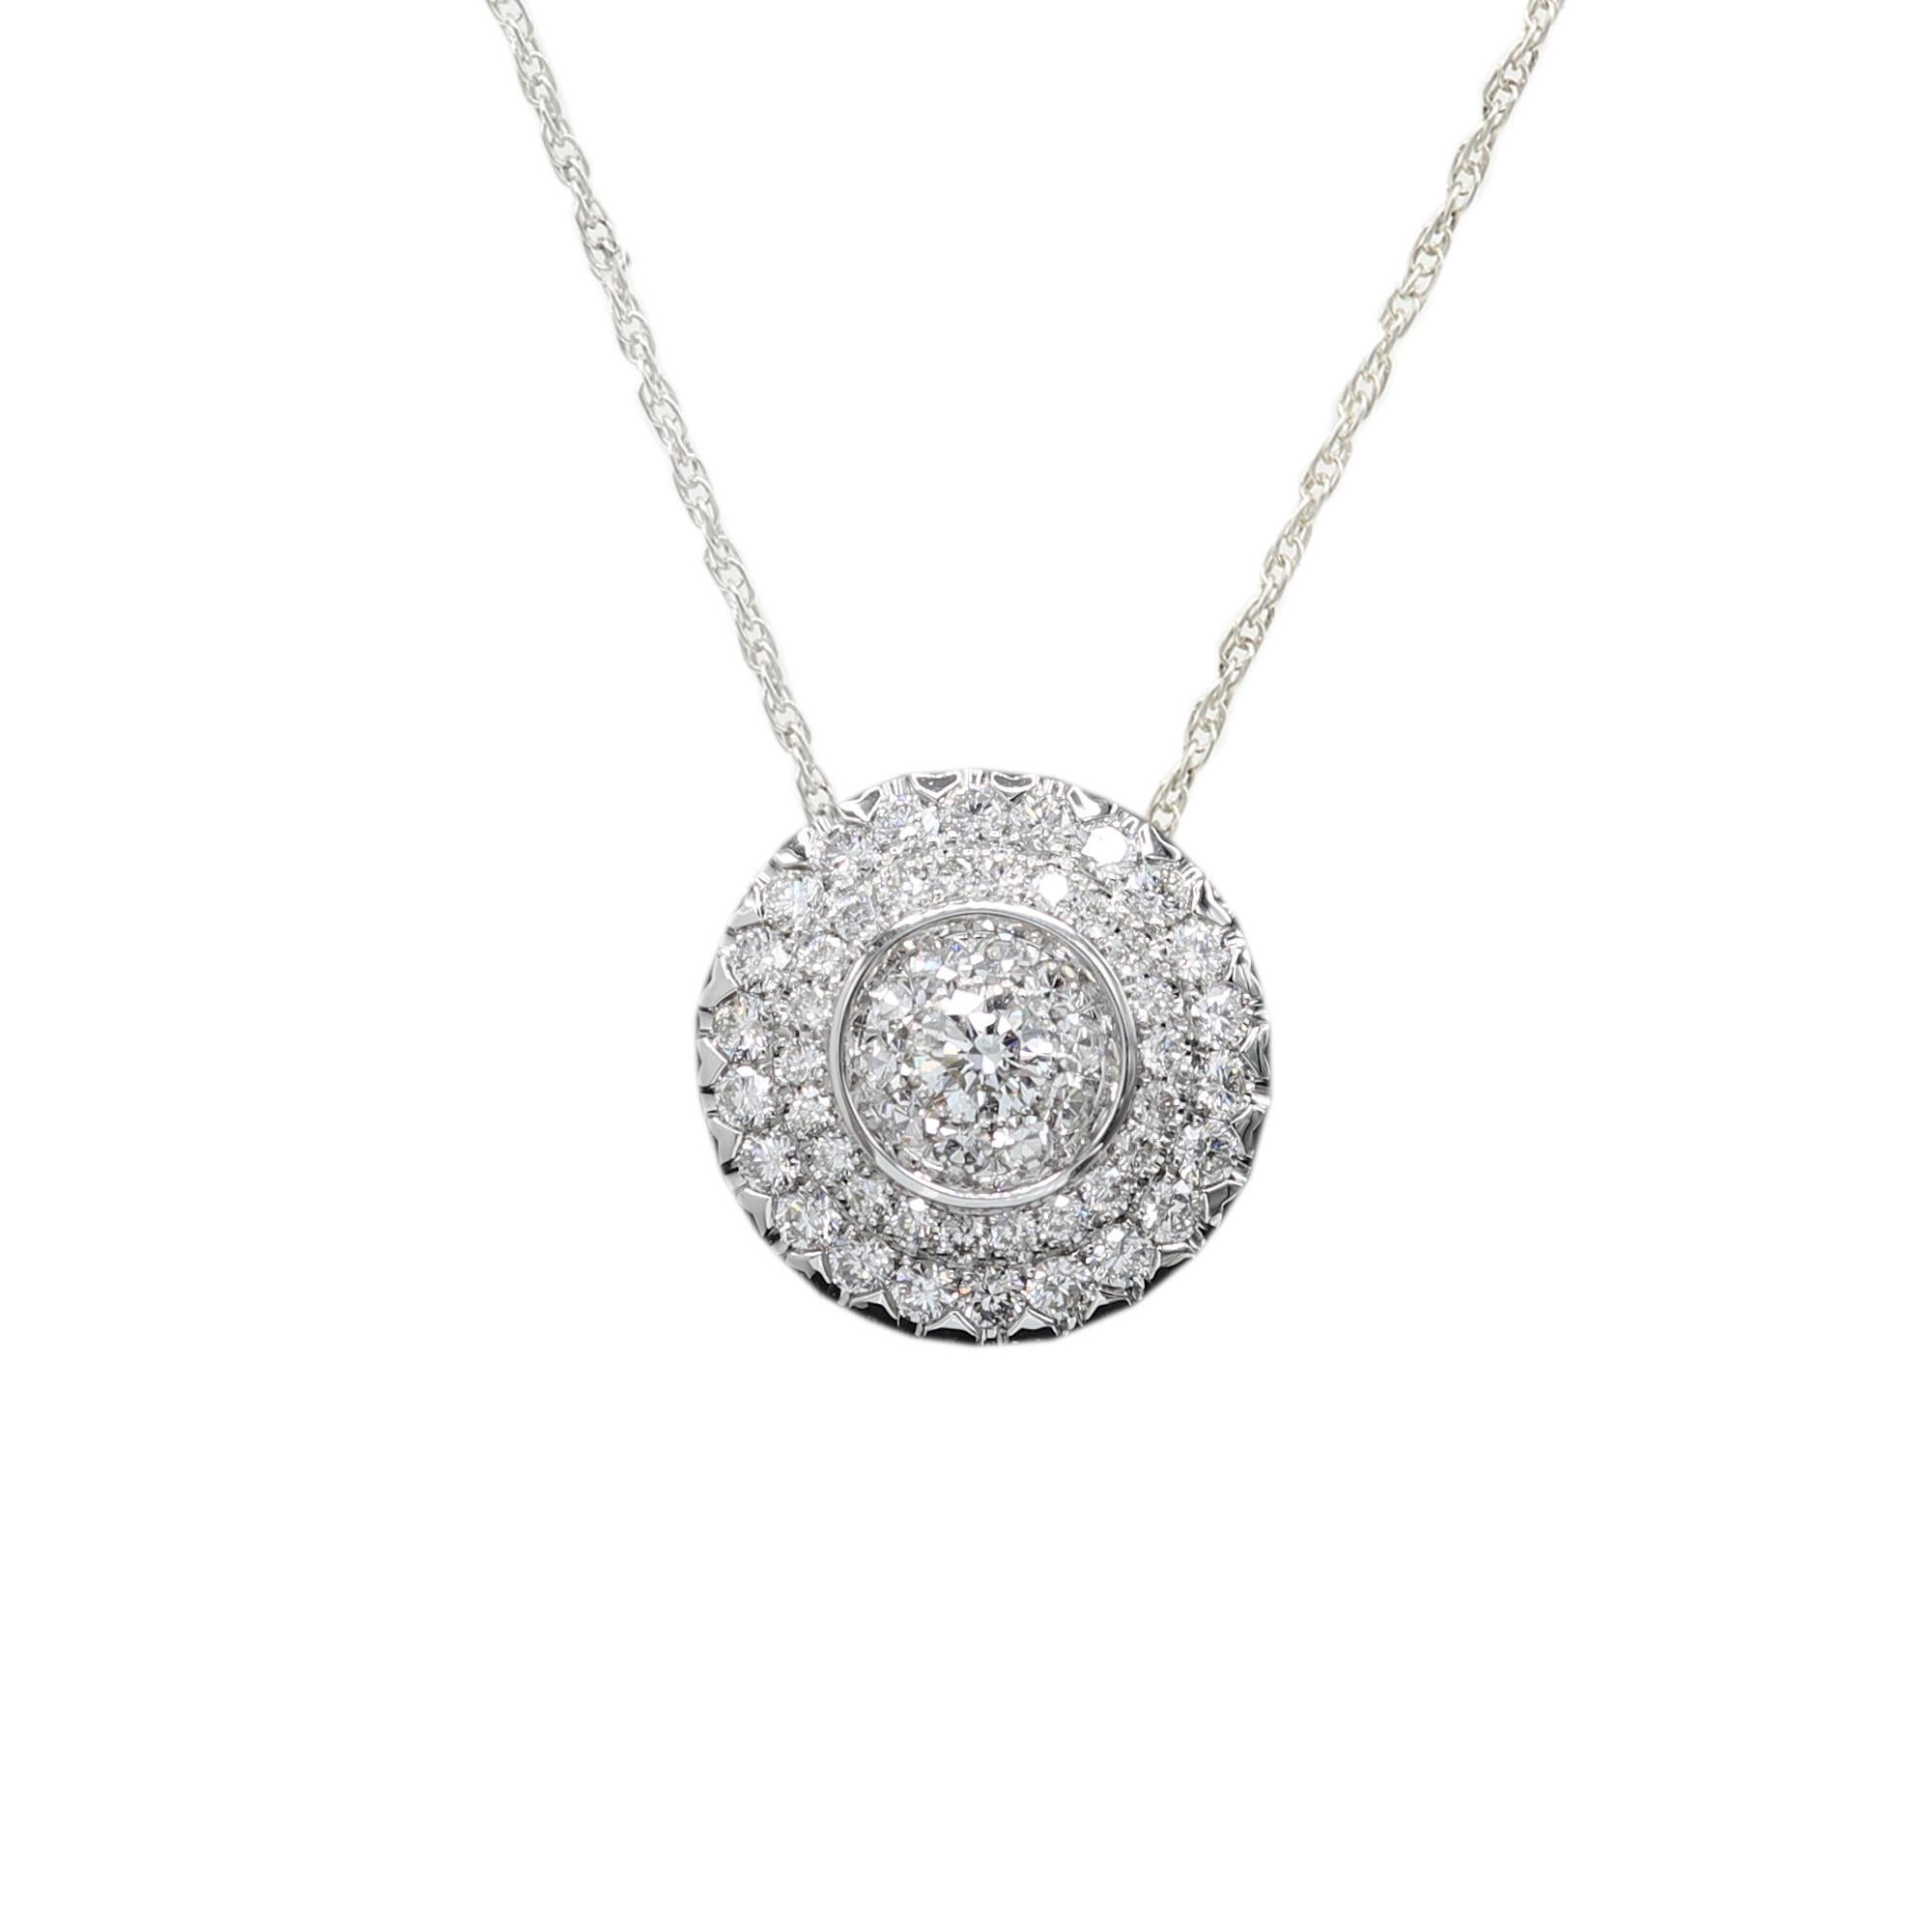 Super Cluster Layout of Brilliant Diamonds, This special craftsmanship makes the diamonds visible to the eye as one large diamond, must see it to believe it ! Pendant diameter size approx 15 mm (1/2' a inch)  18k white gold 6.40 grams.
Total